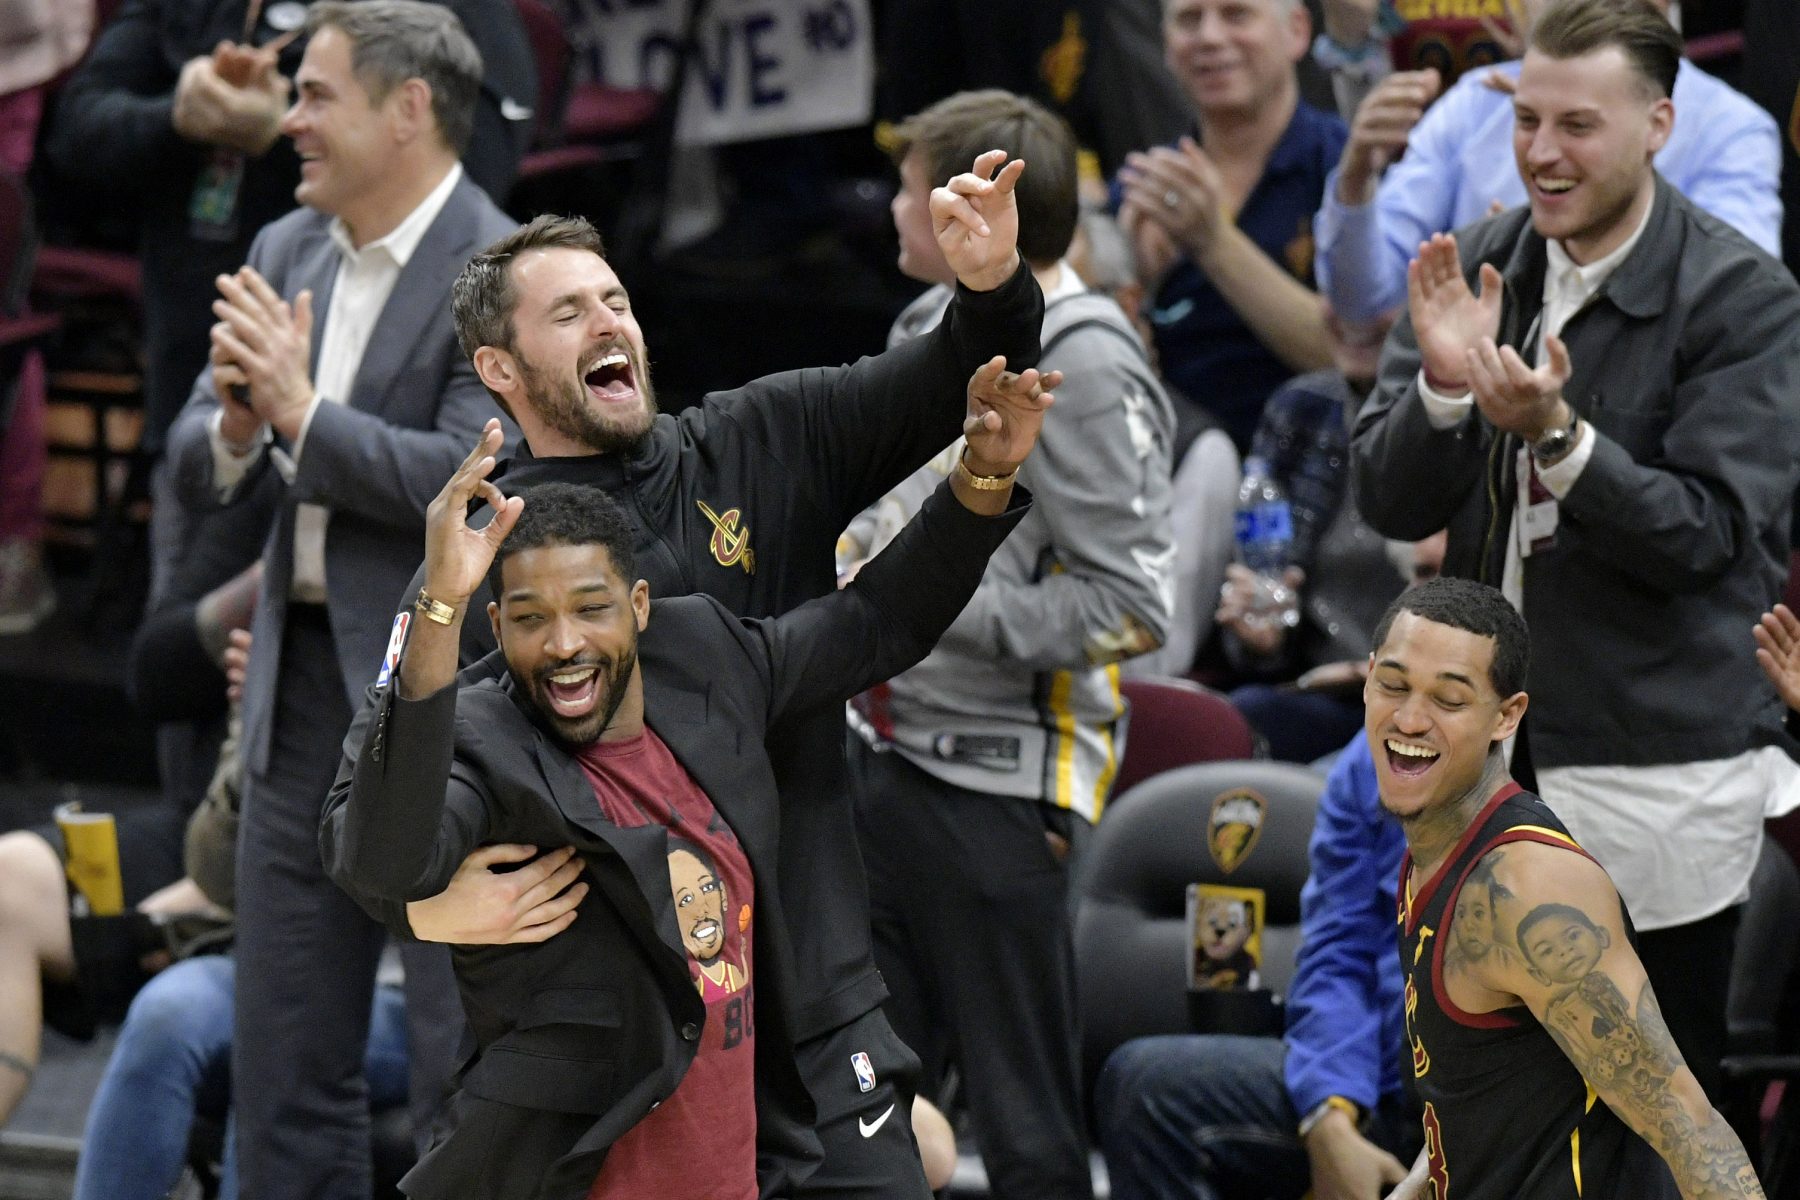 Kevin Love and Tristan Thompson